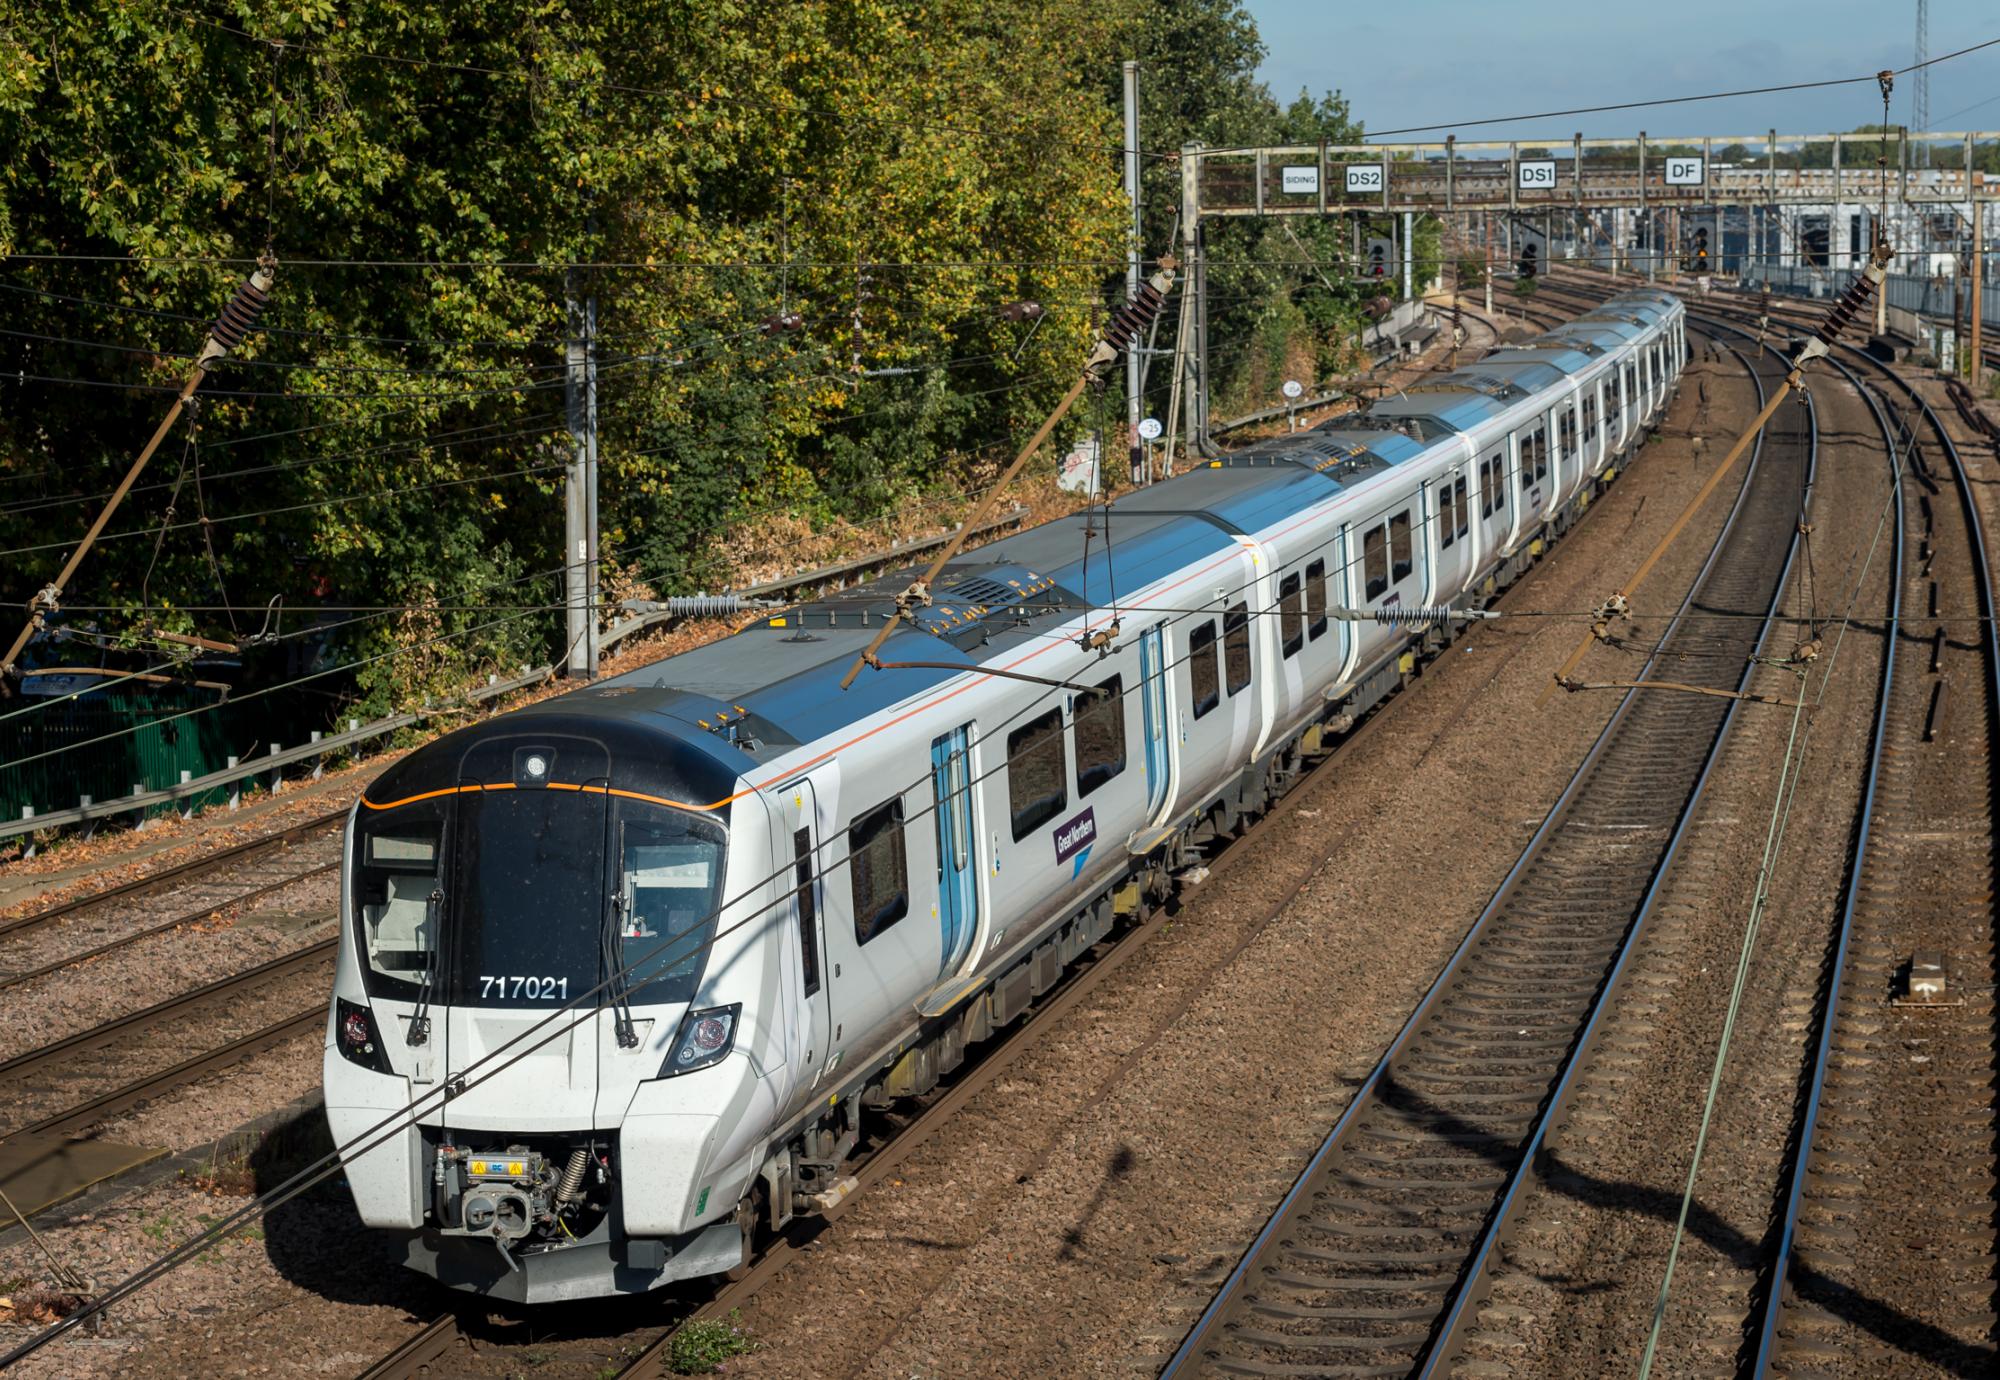 Great Northern’s Class 717 set for ETCS upgrade